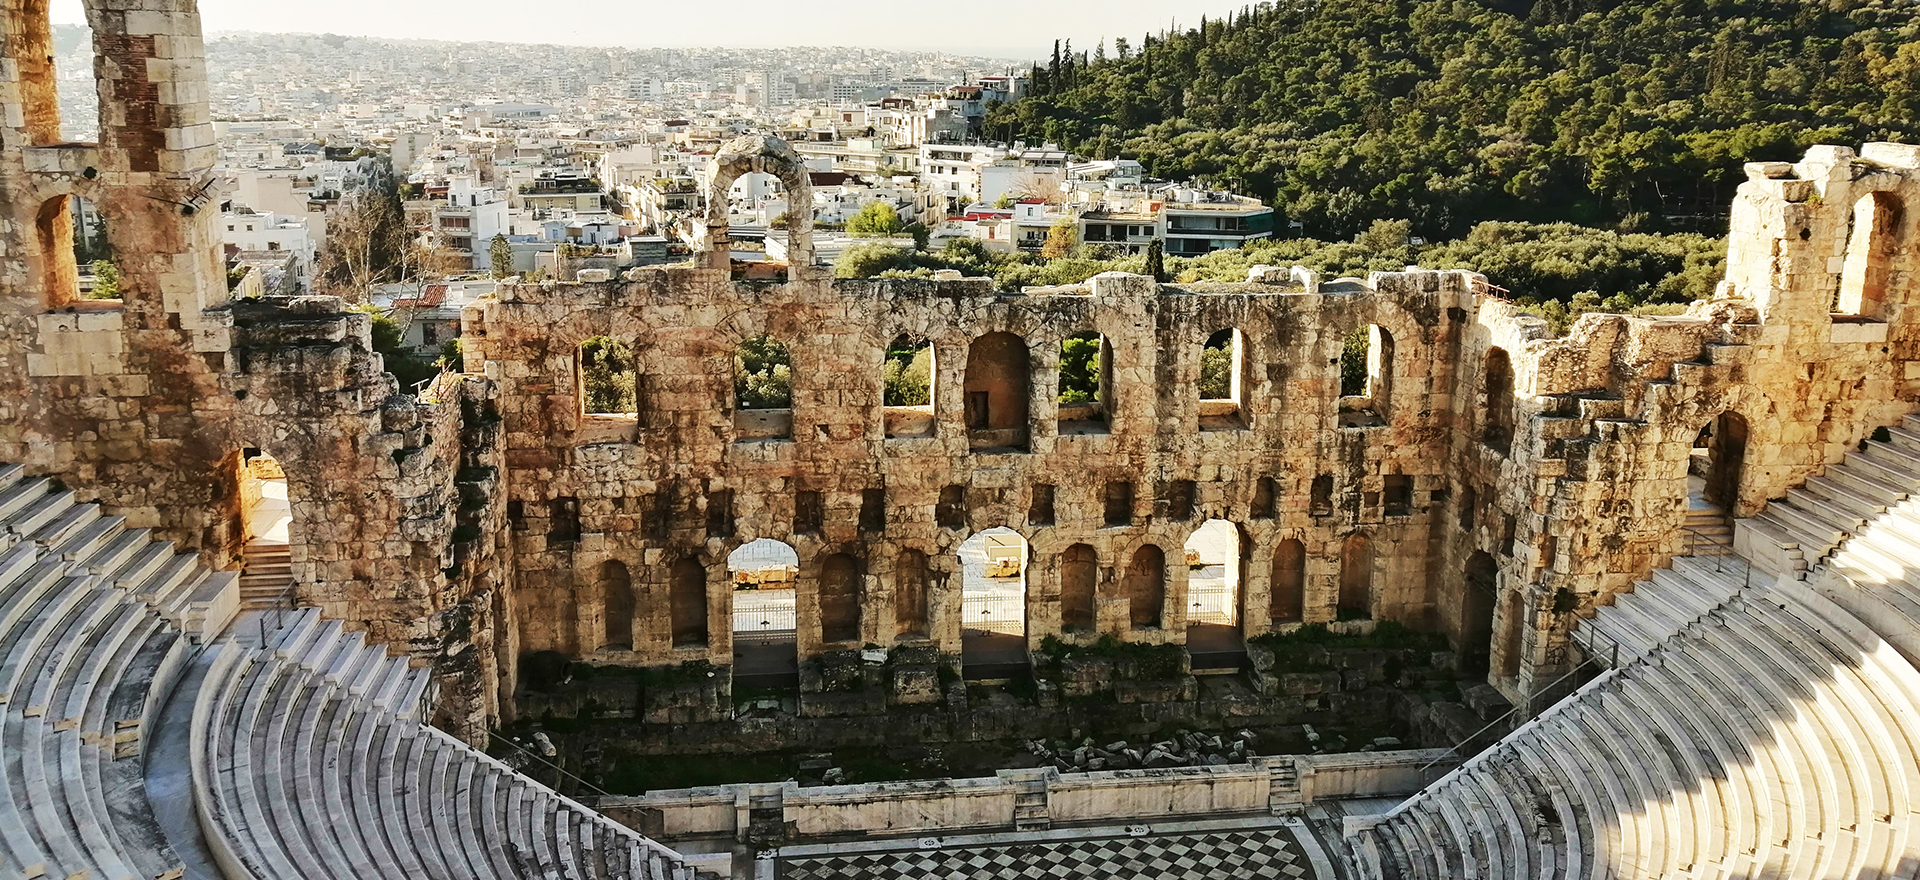 View of ancient Roman Theatre in Athens. City is in the background.